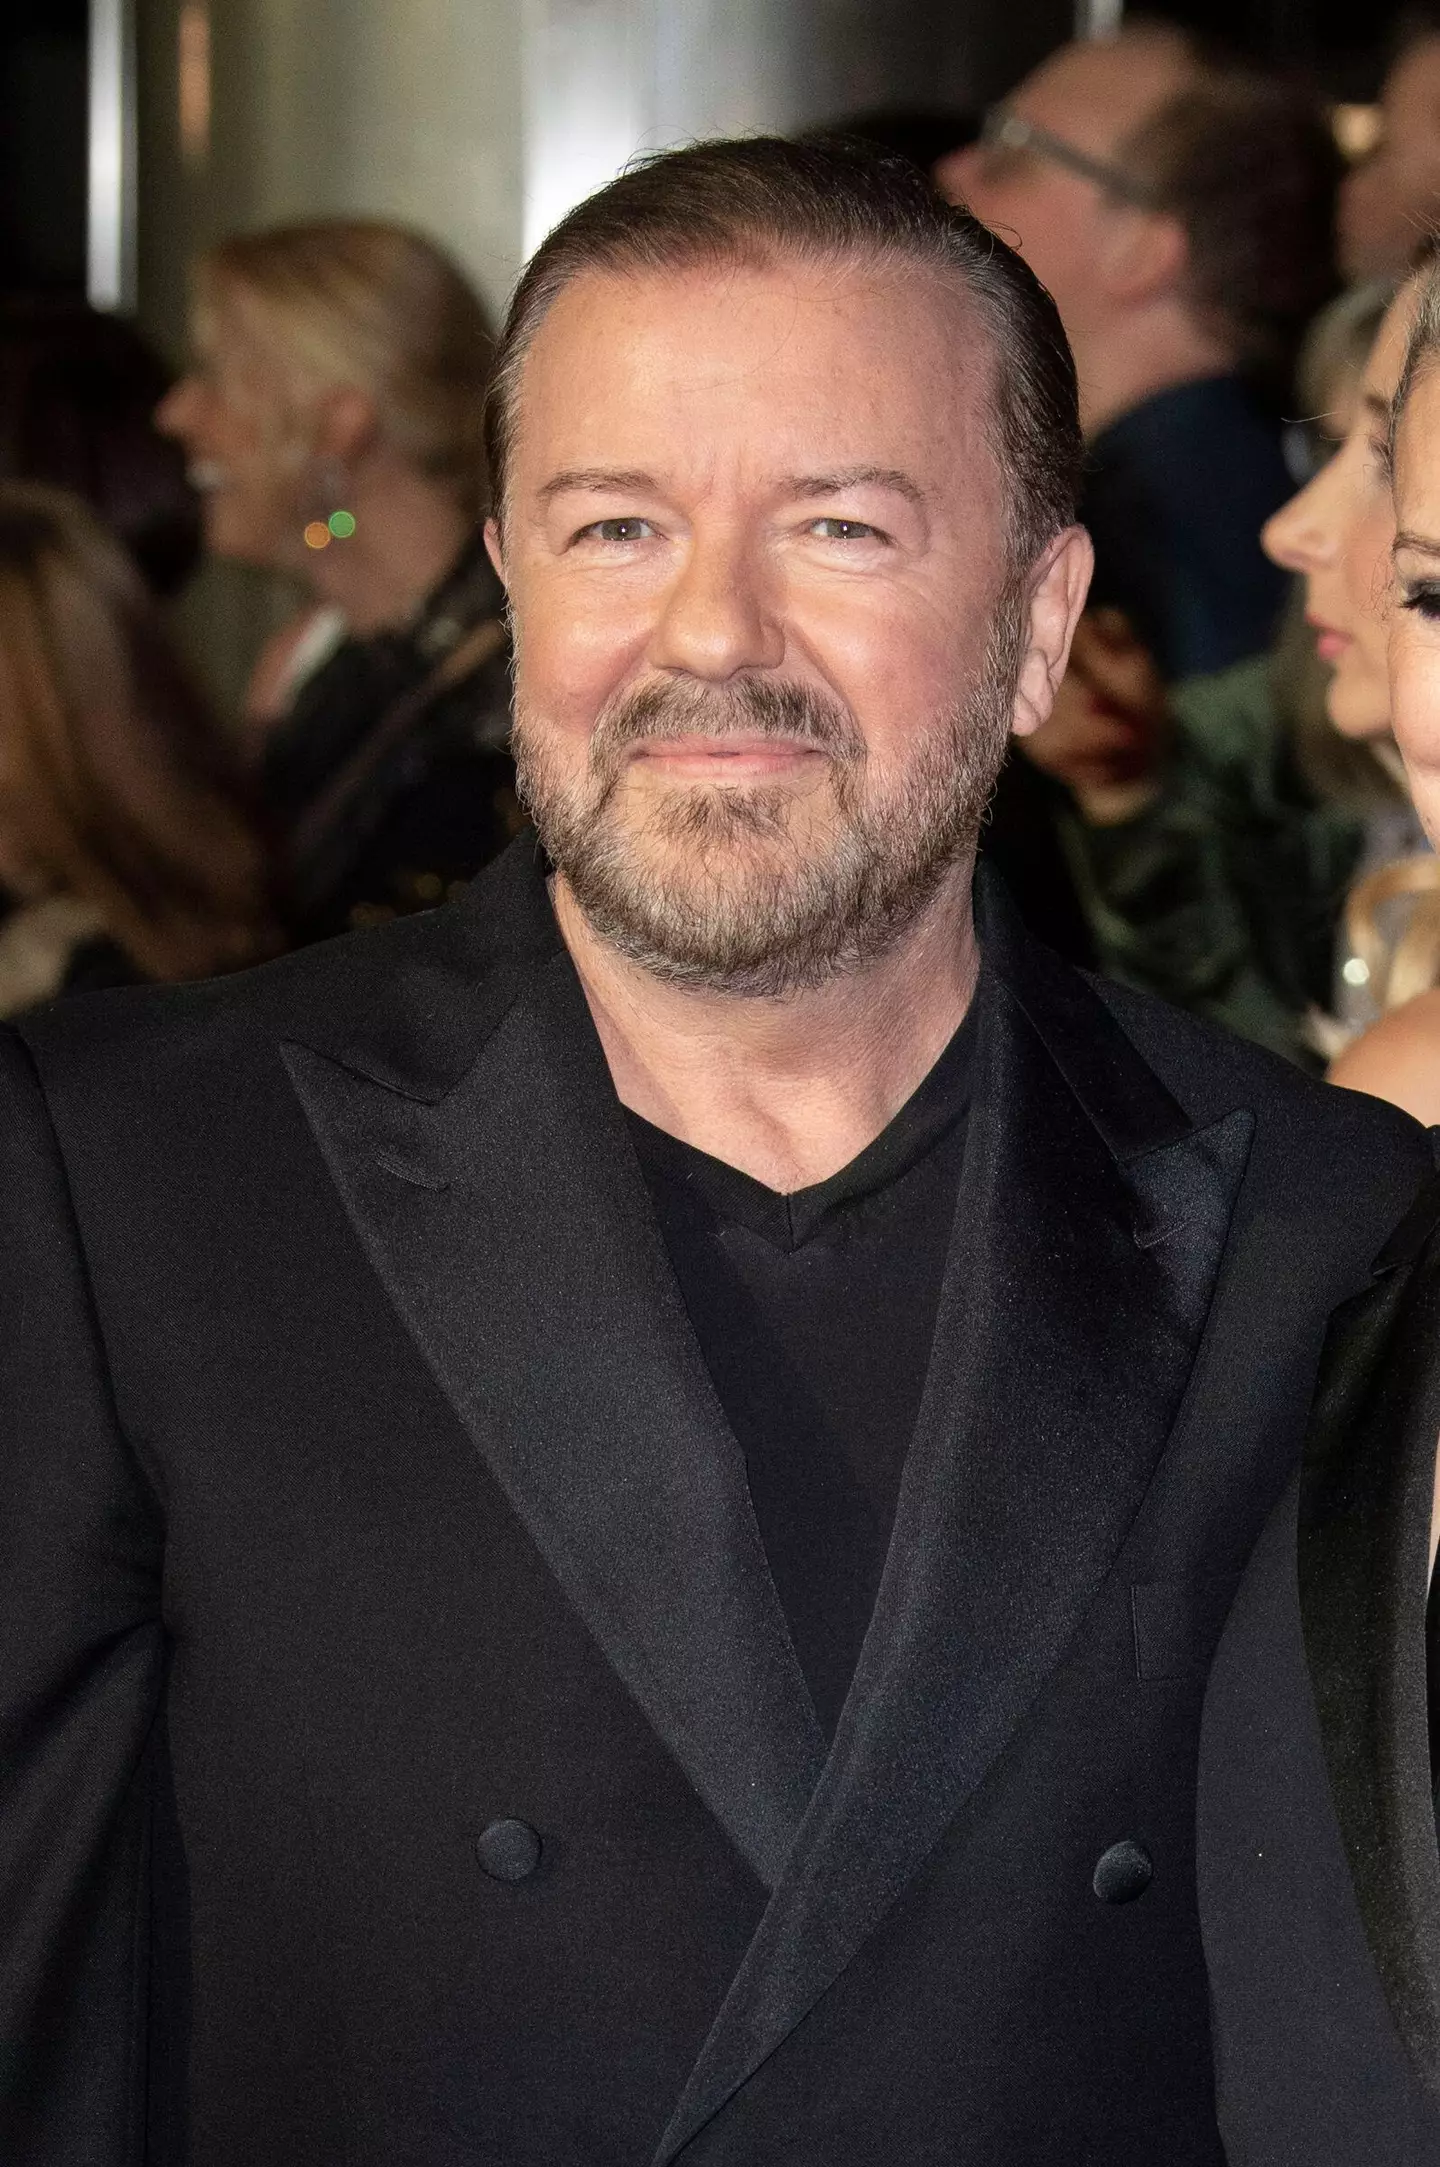 Ricky Gervais has opened up about the 'worst eight hours of his life'.